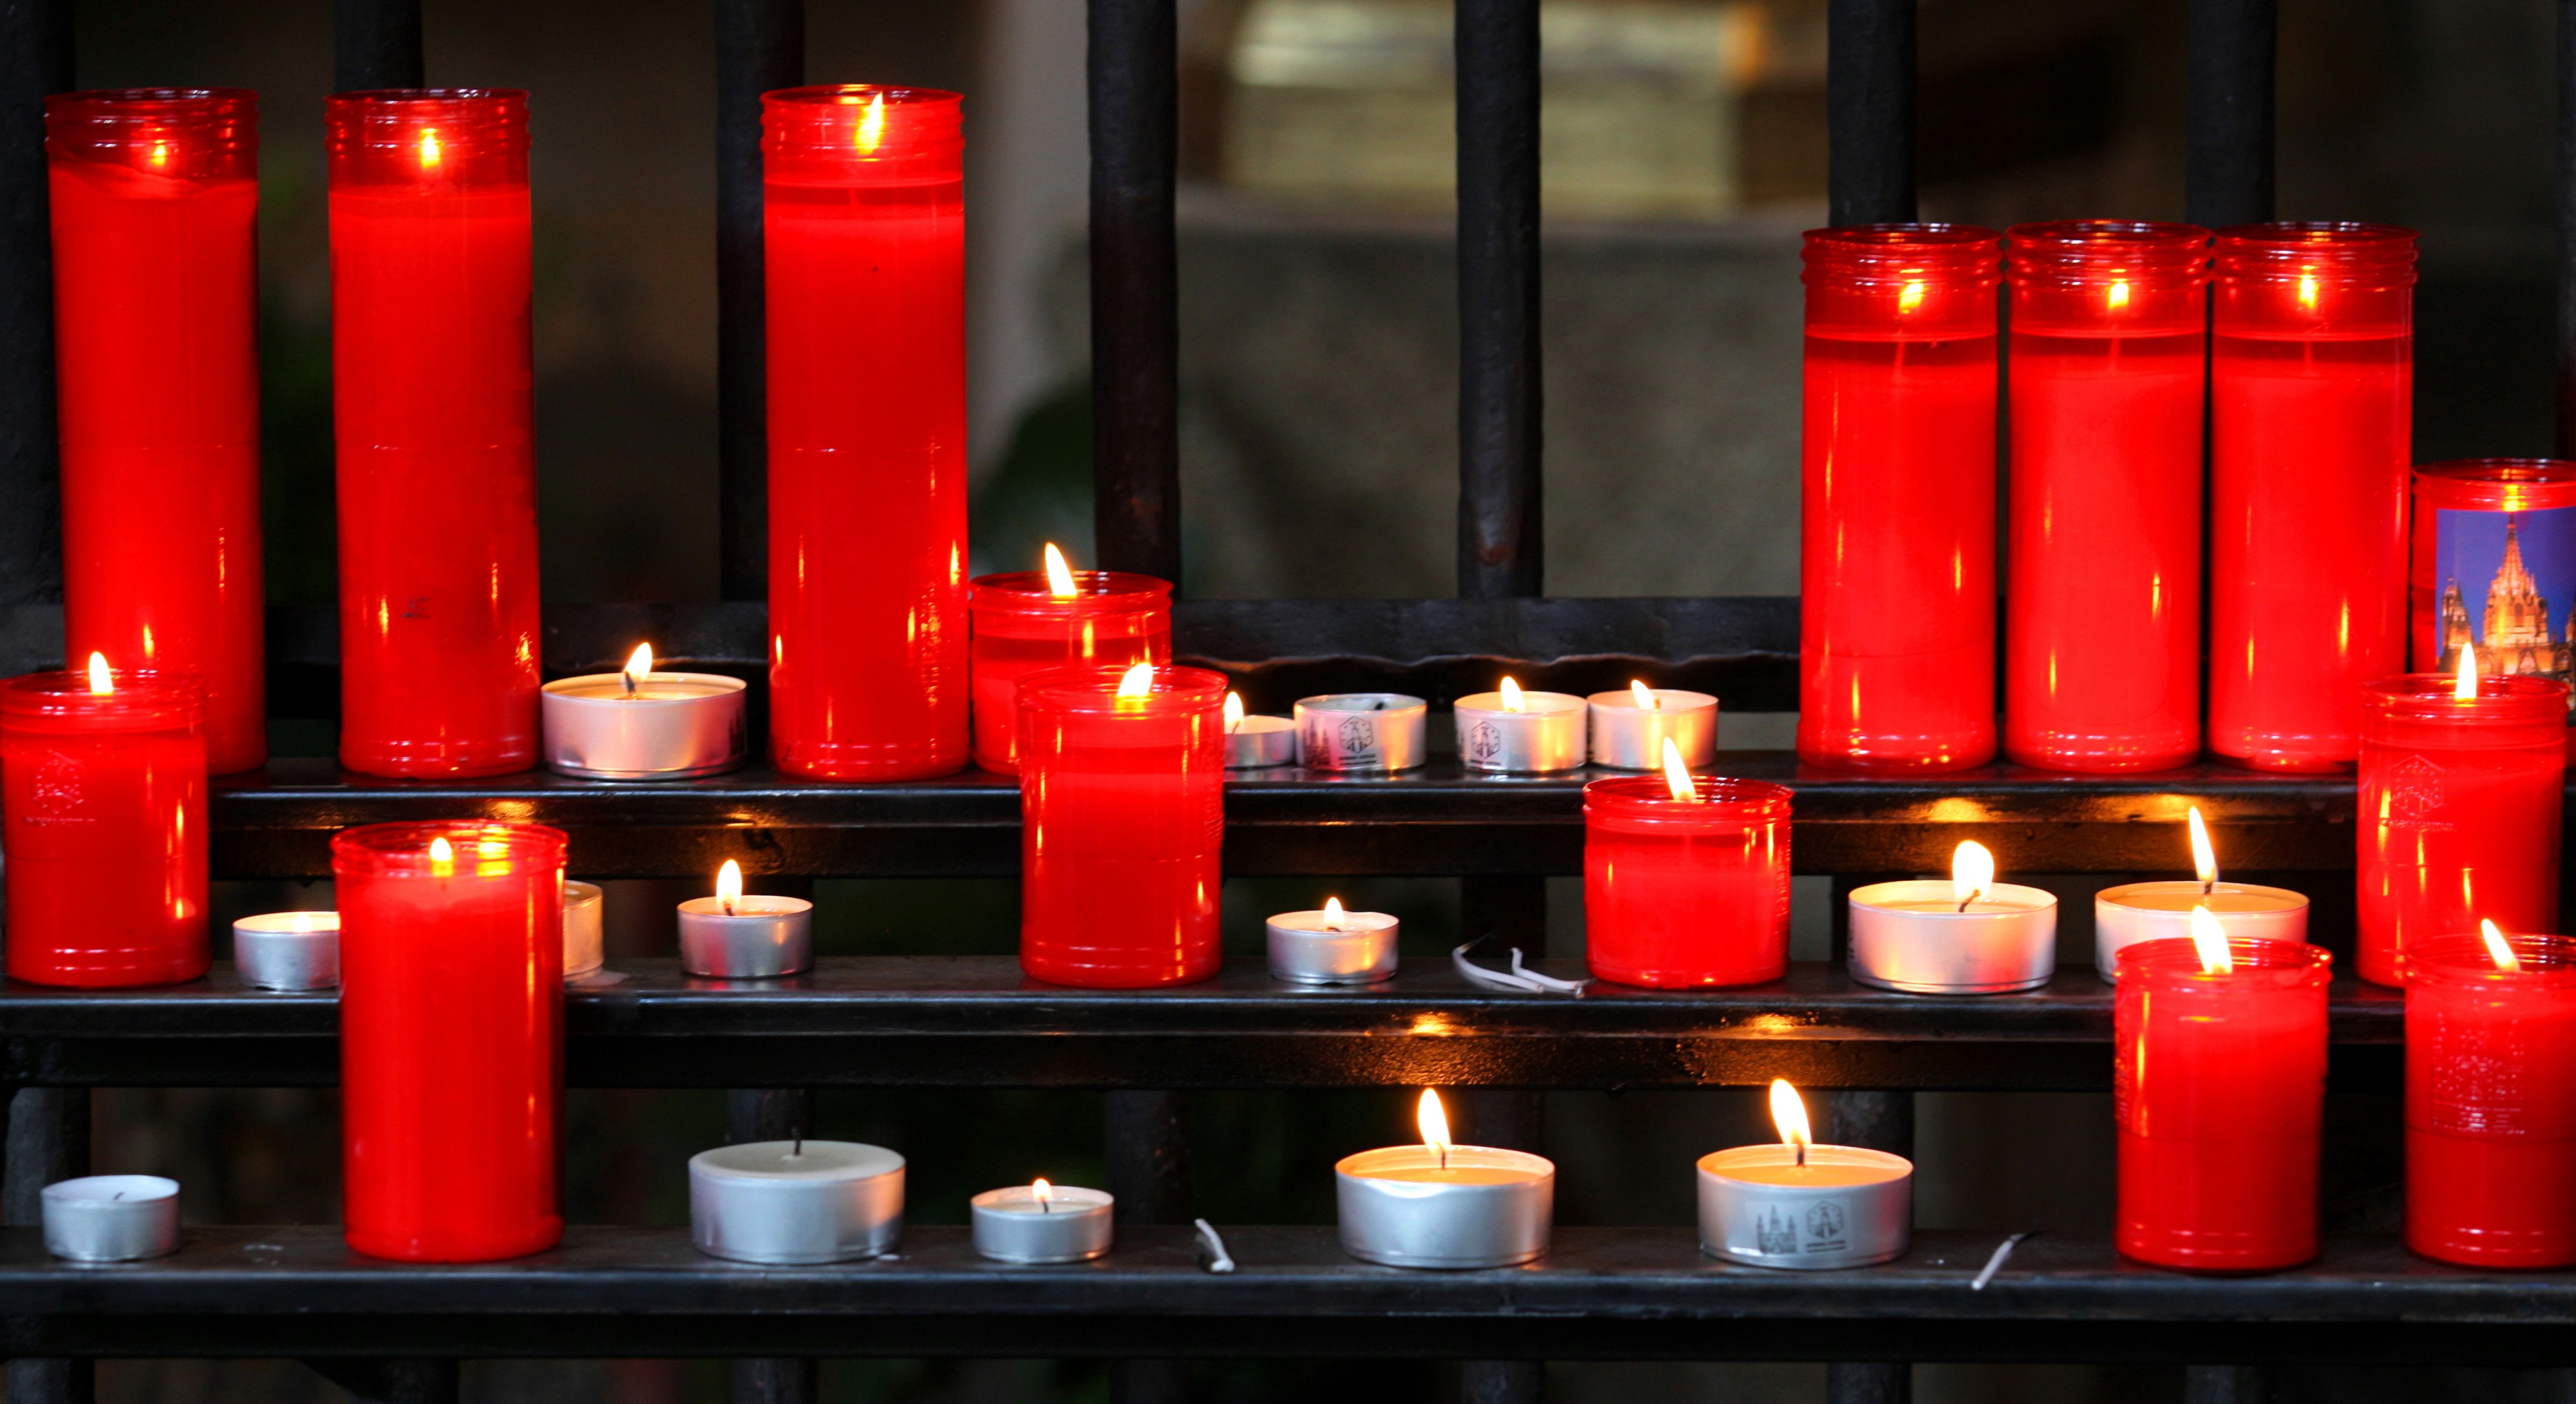 lit candles in Barcelona, Spain, Europe, August 2013, picture 42